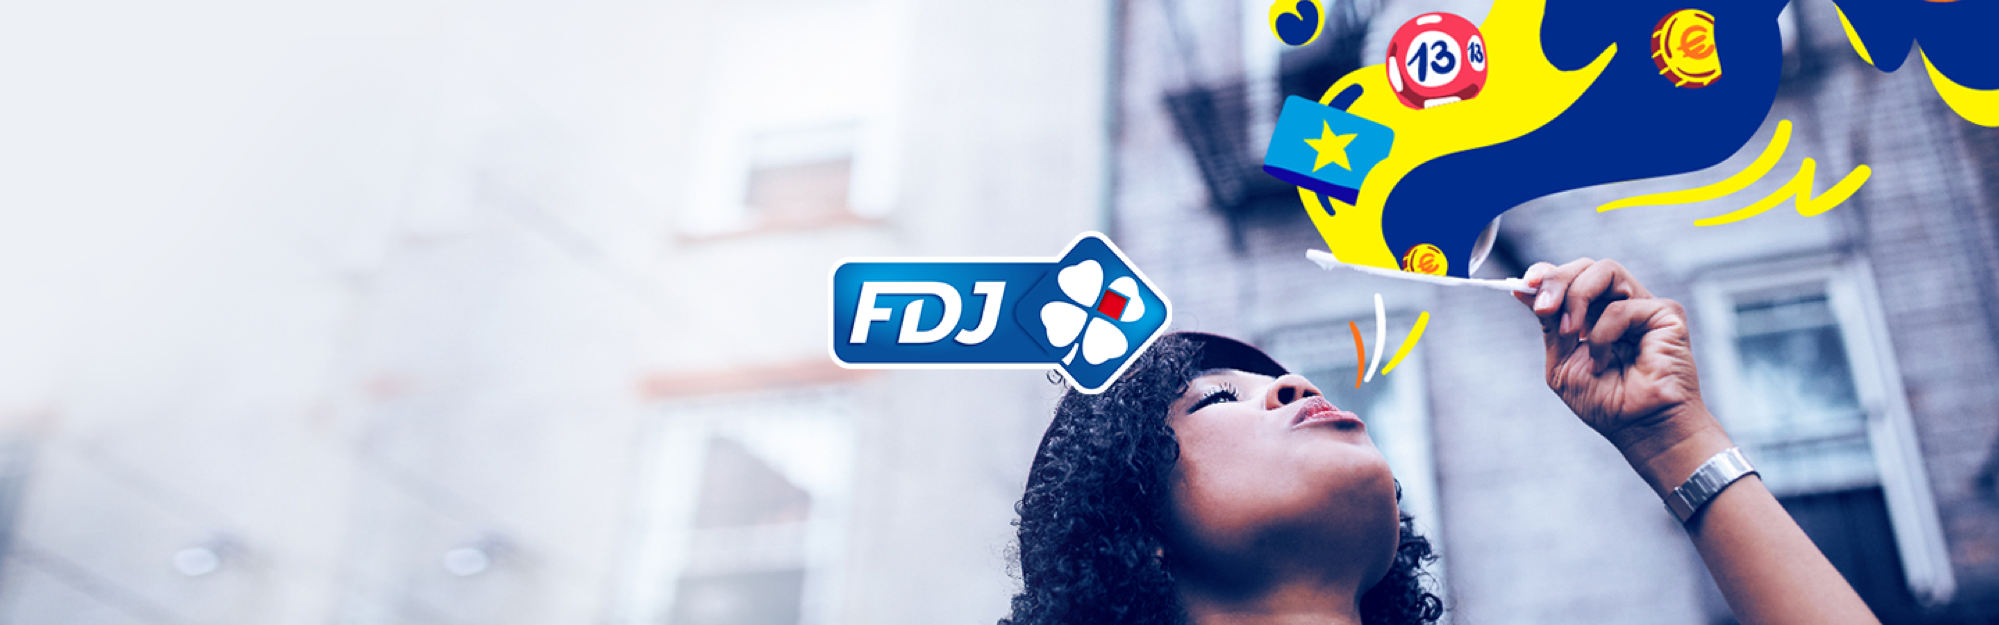 FDJ (National French lottery)